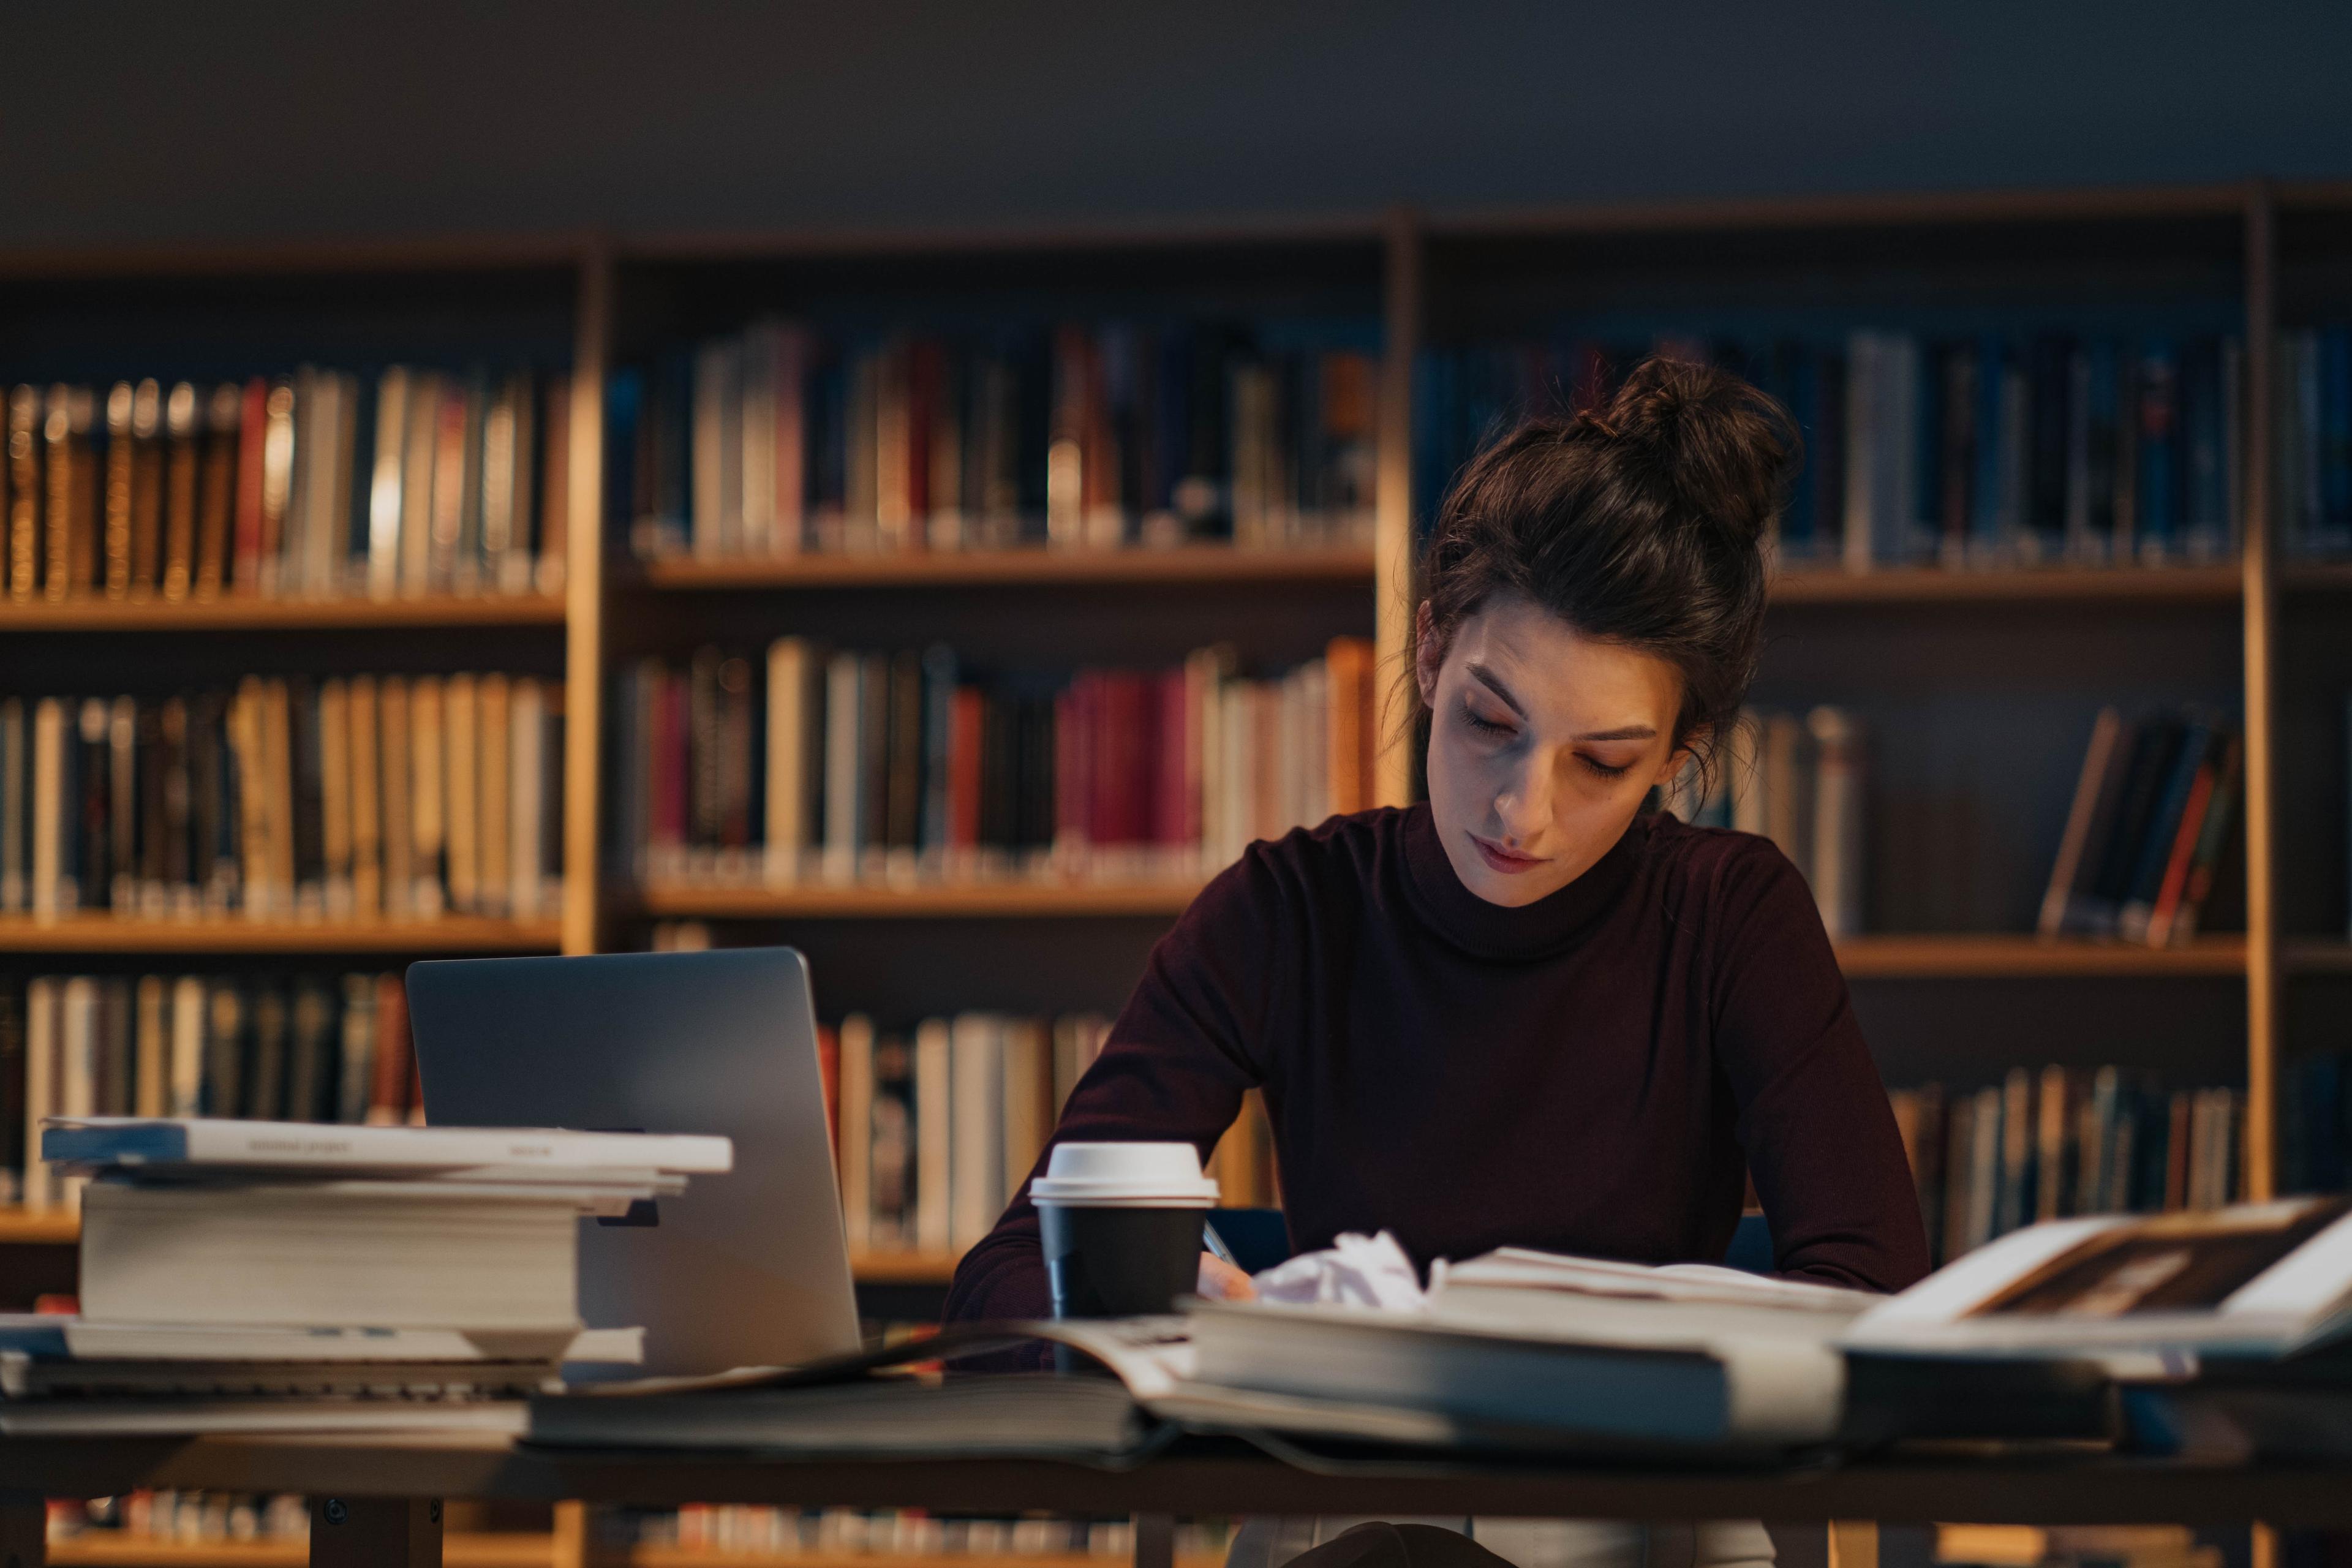 A woman in a black turtleneck in front of an open laptop reads a book in a library